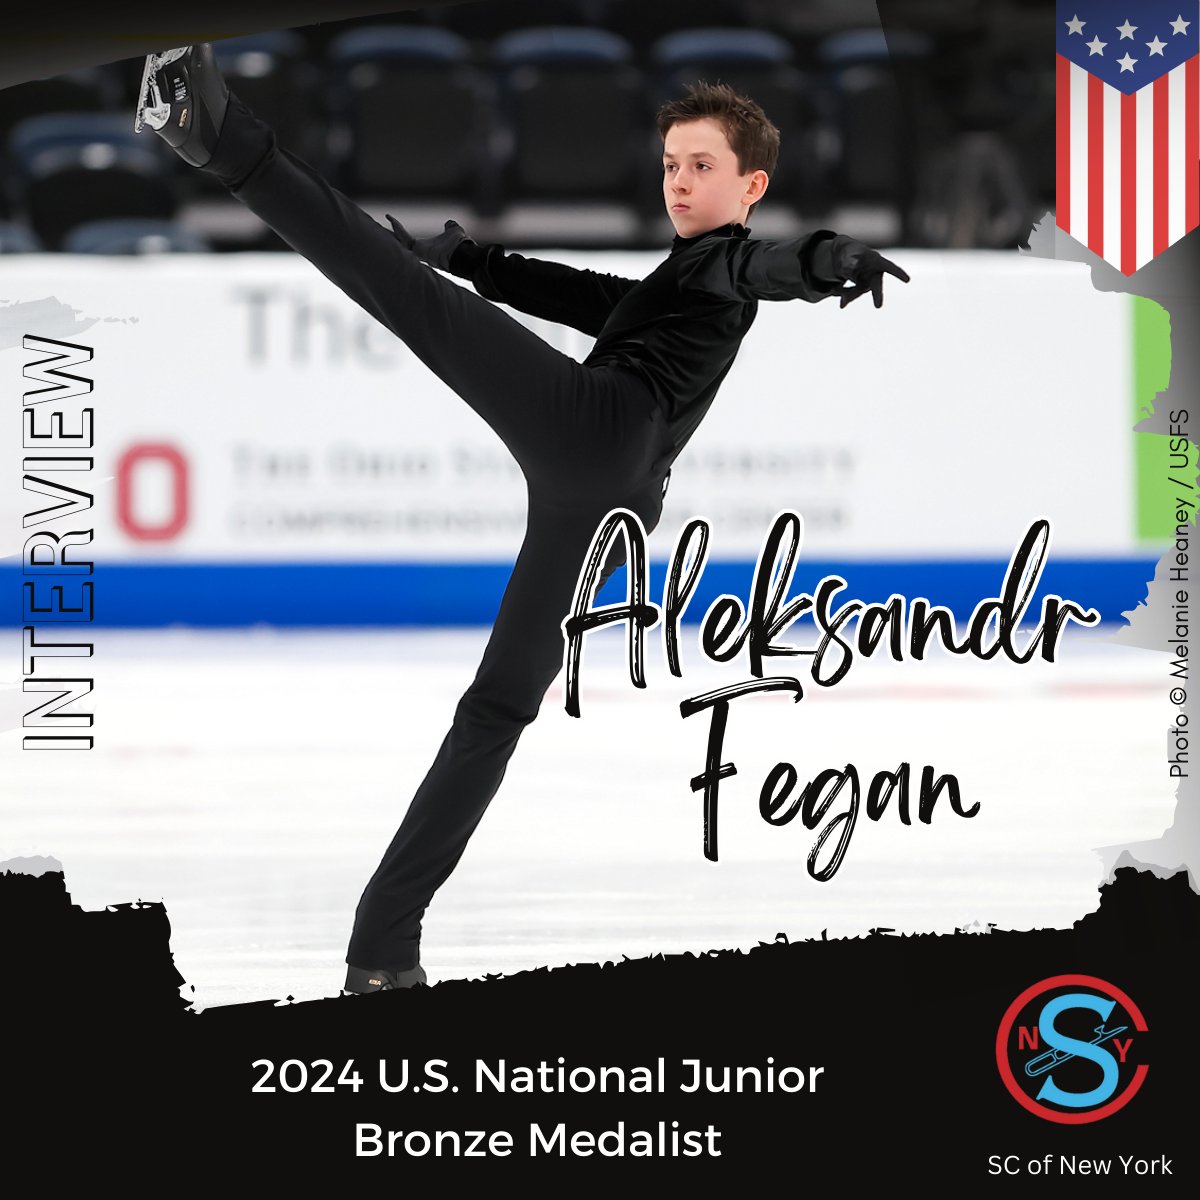 USA's 🇺🇸 Aleksandr Fegan: On Ice and En Pointe Learn more about the 2024 U.S. National Jr. 🥉 who discovered his passion for figure skating after meeting 2014 Olympic champions Maxim Trankov and Tatiana Volosozhar. Beginnings and ballet, looking ahead to 2024-25, roots and more!…